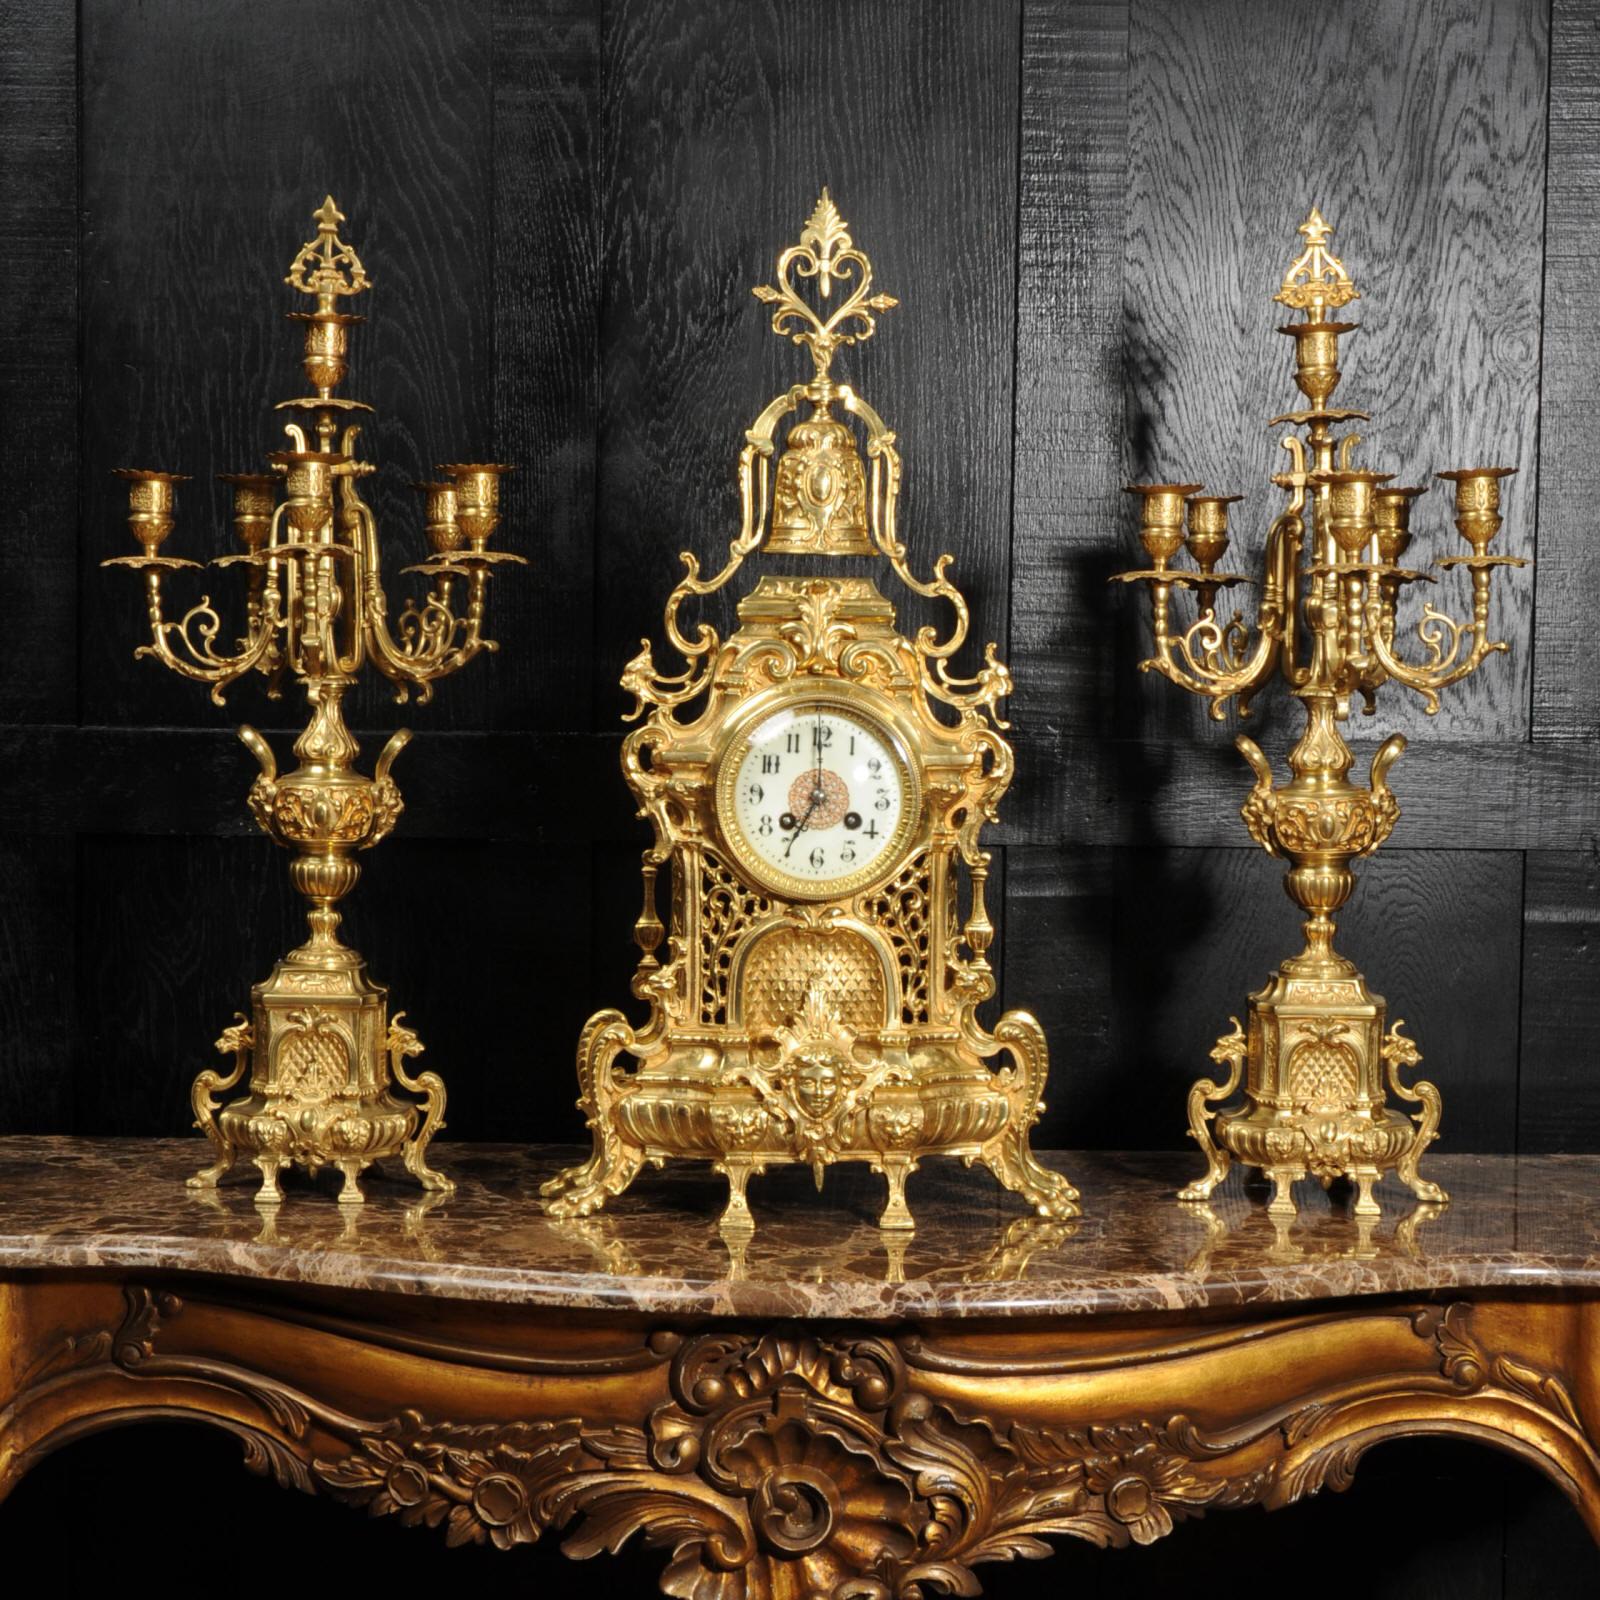 A large and impressive original antique French Baroque clock set, beautifully made in gilt bronze. It is heavily and crisply modelled with lions masks, hairy paw feet, flowing foliage and surmounted by a bell. The front of the clock is modelled as a